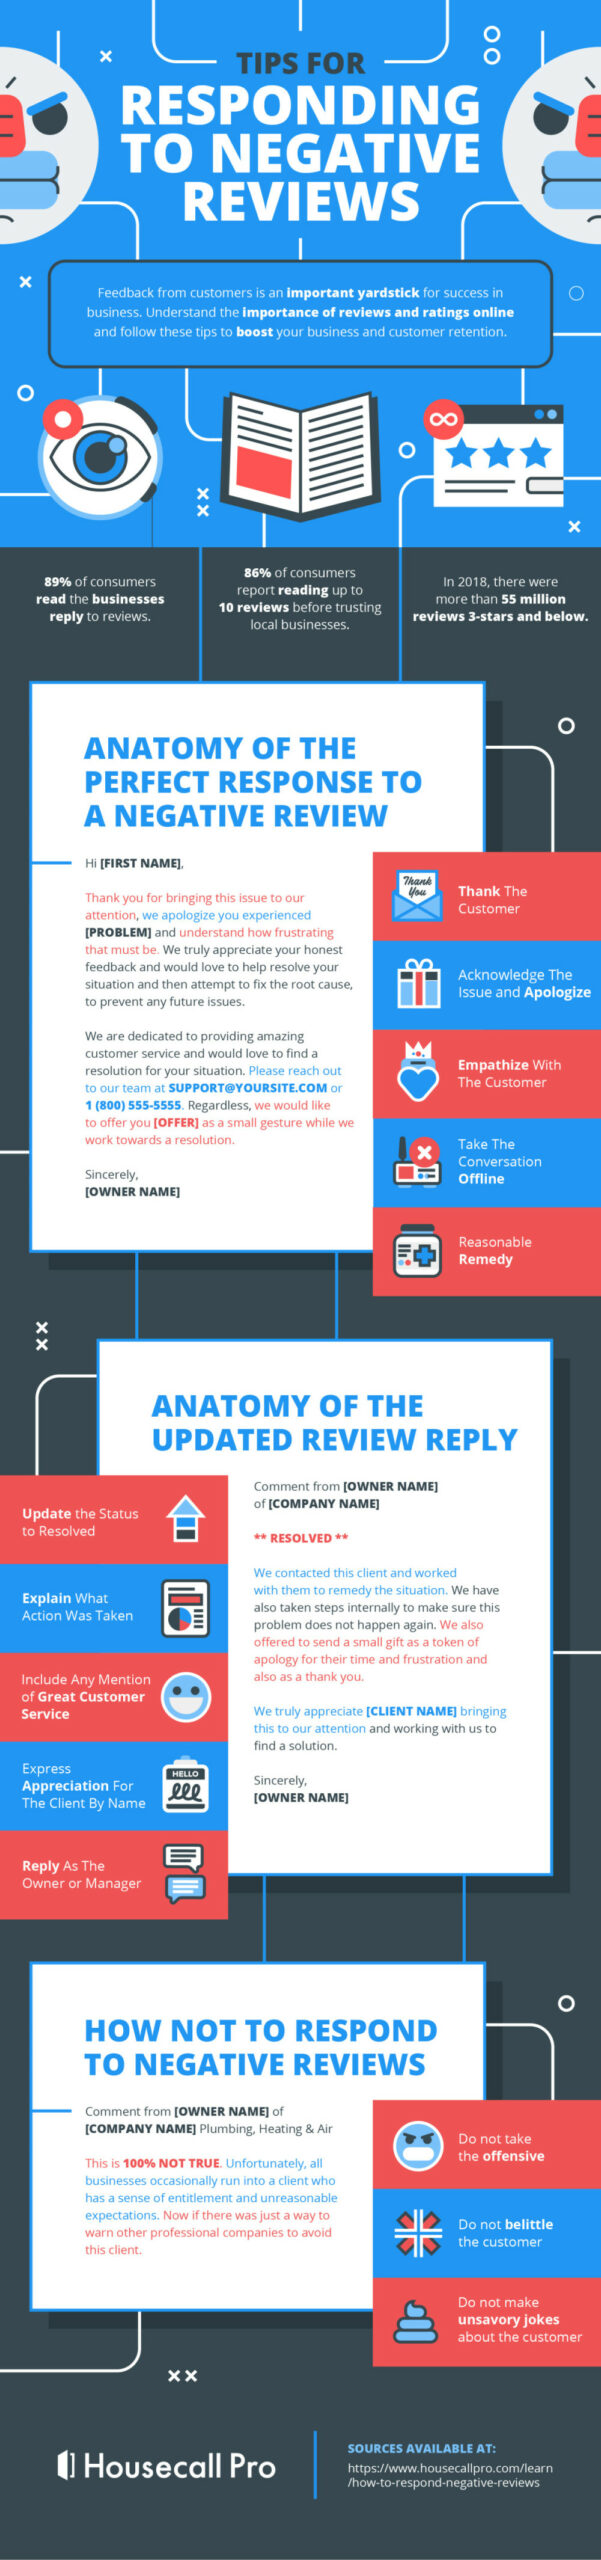 tips for responding to negative reviews infographic scaled